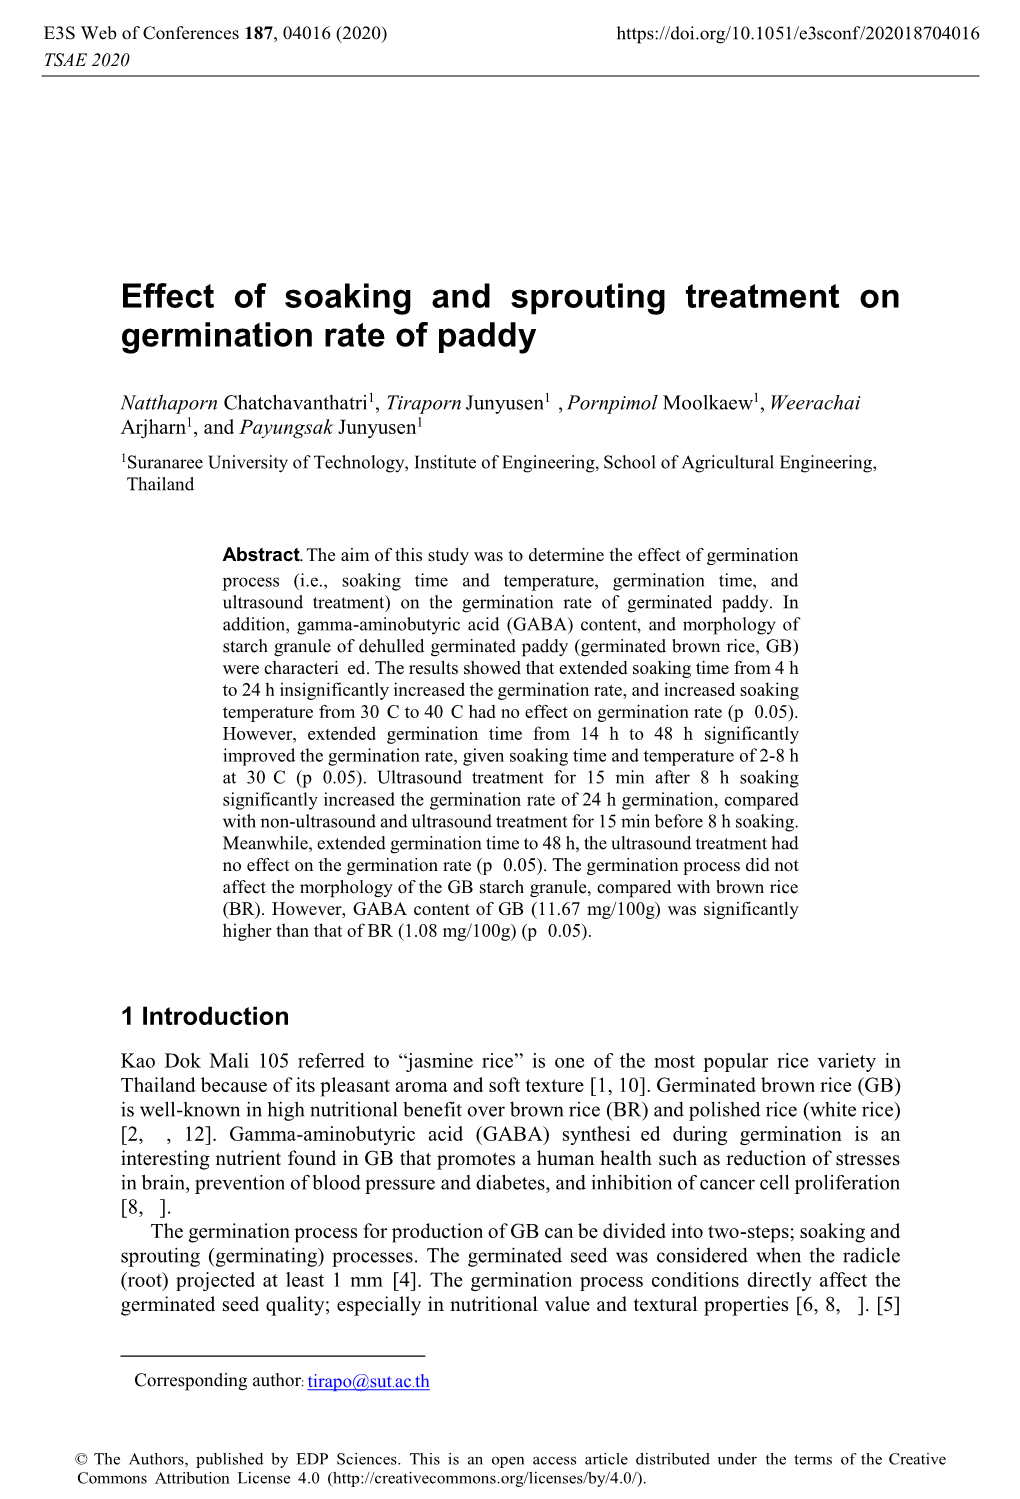 Effect of Soaking and Sprouting Treatment on Germination Rate of Paddy